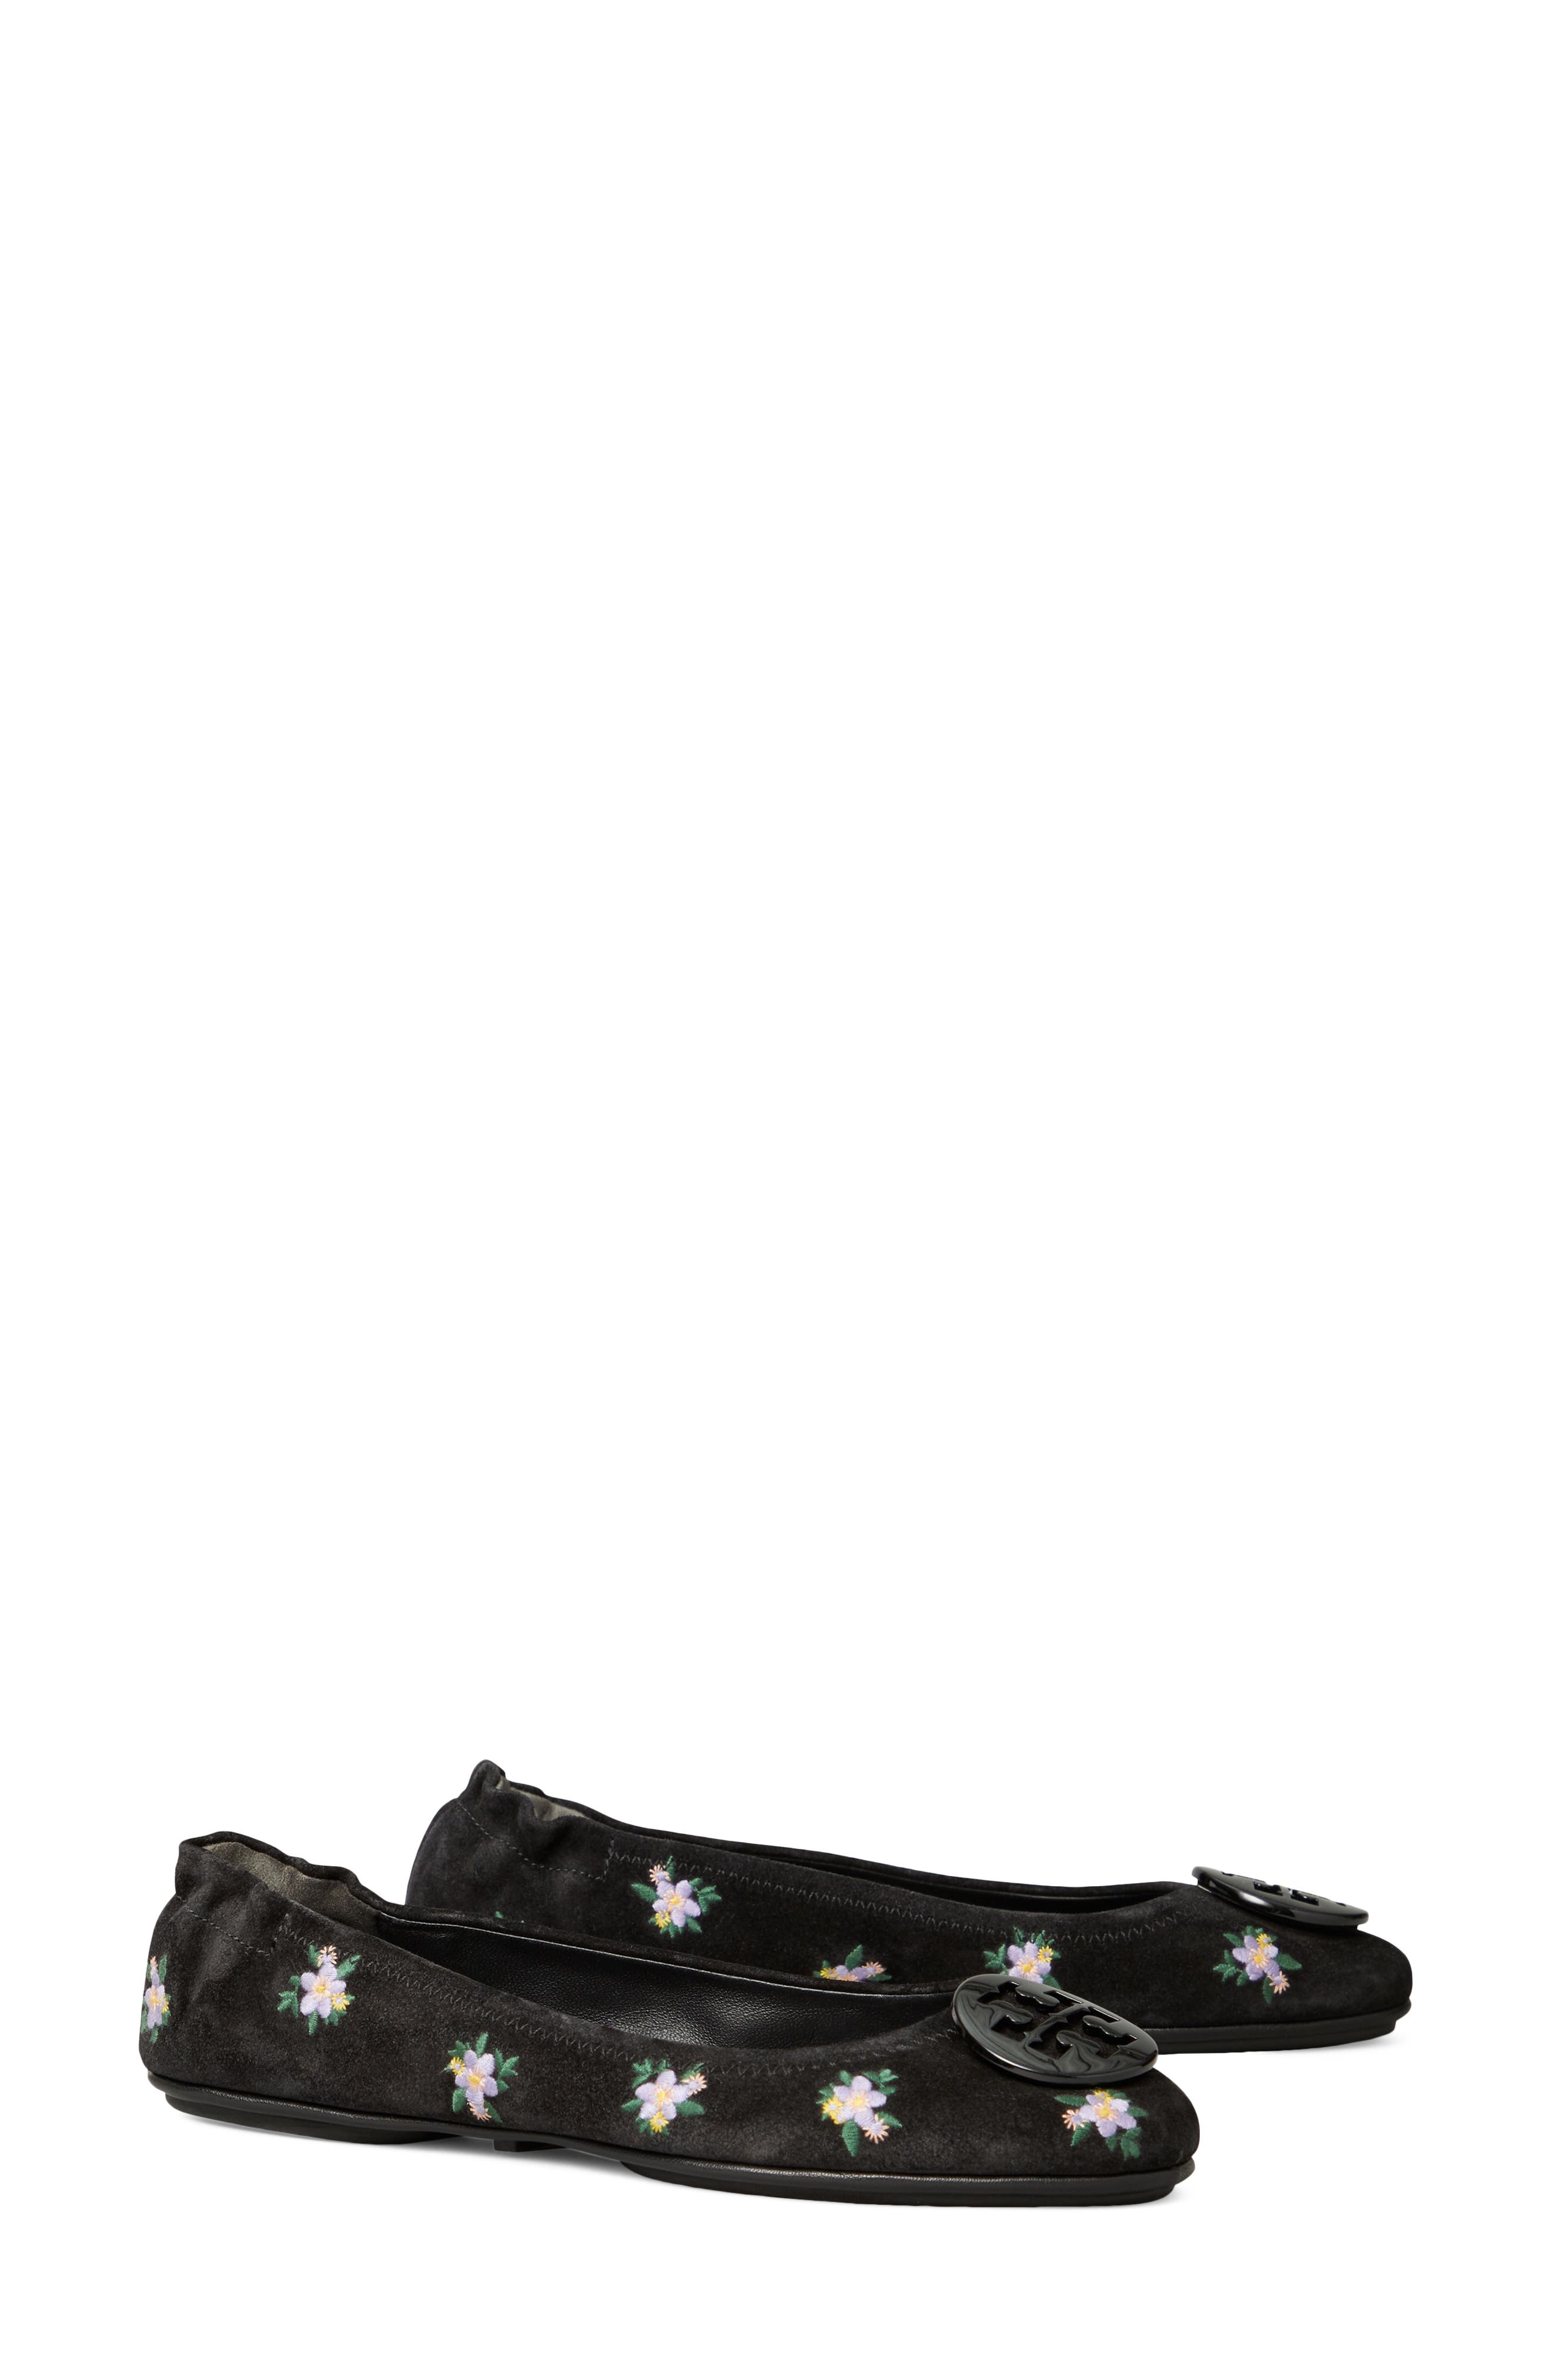 Tory Burch Minnie Travel Ballet Flat in Daybreak Ditsy /Perfect Black at Nordstrom, Size 5